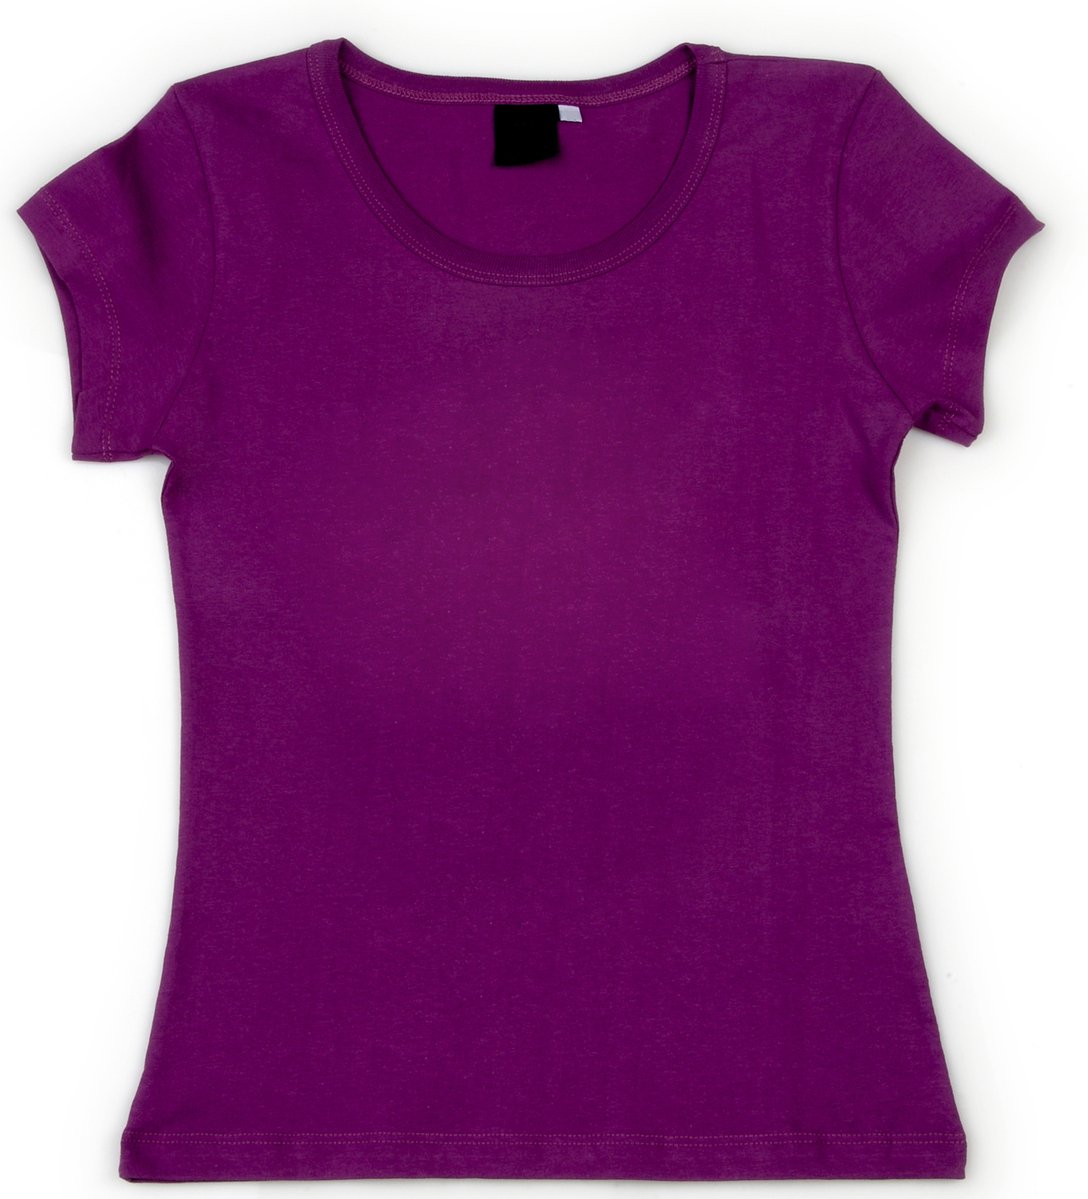 an unisex purple t - shirt sitting upright on a white background